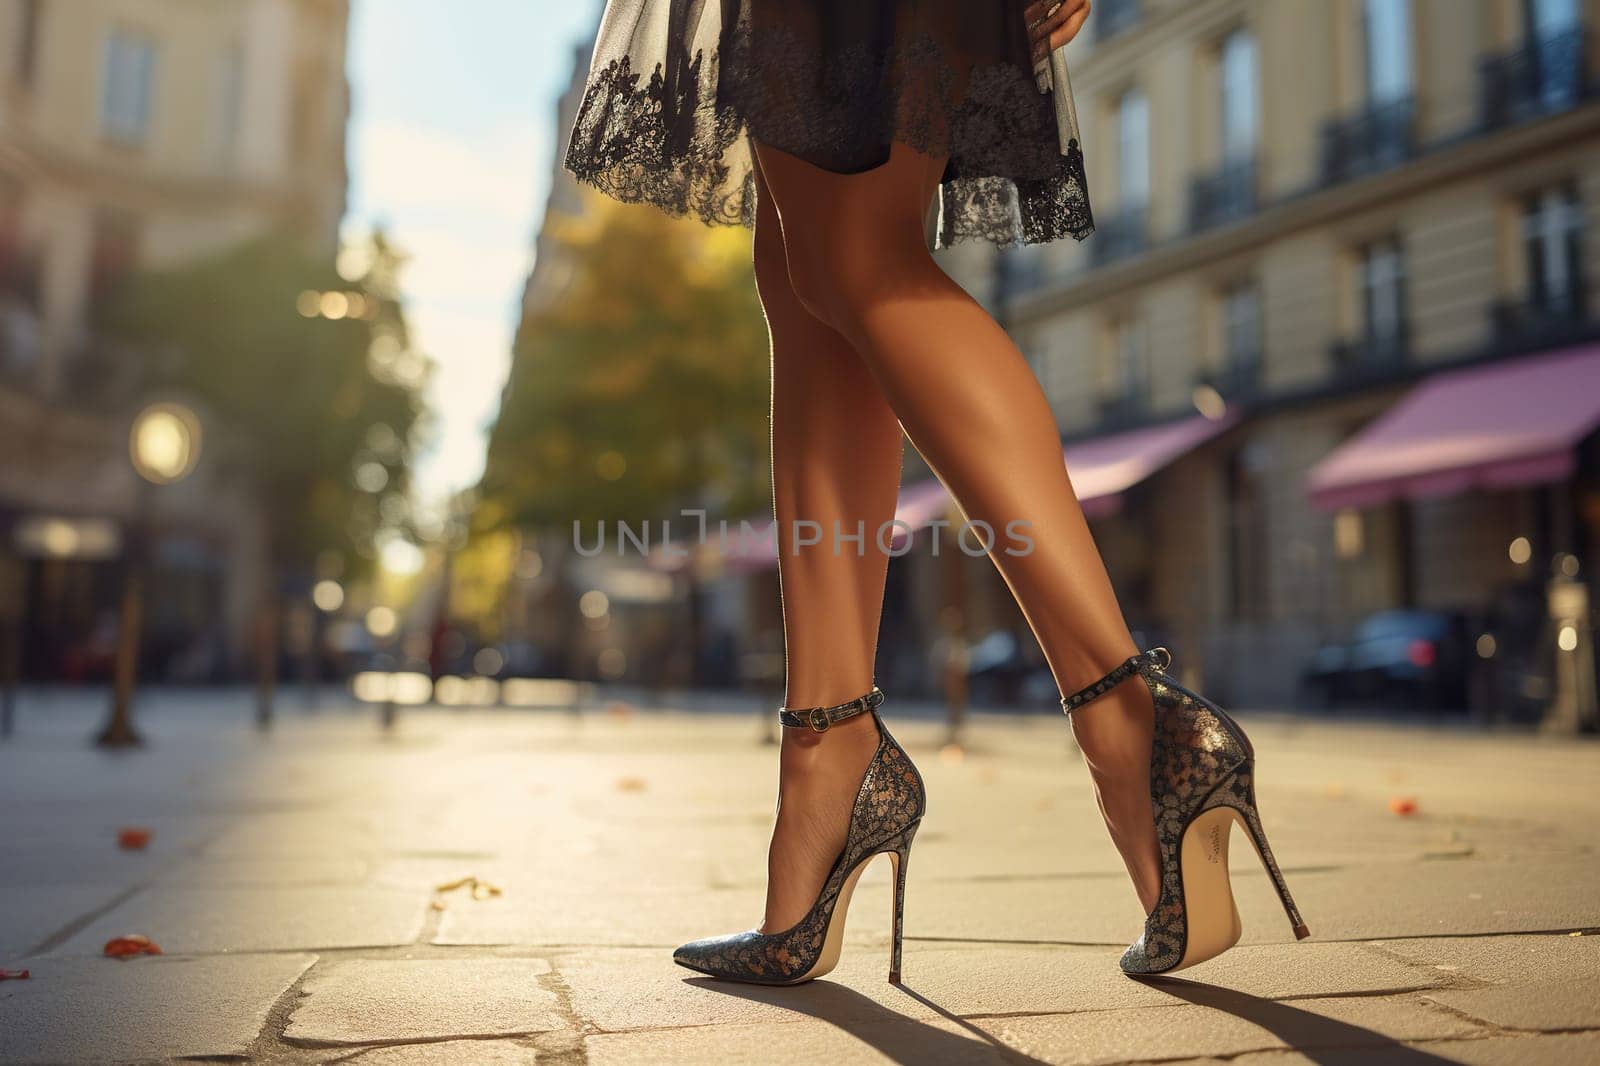 Slender female legs in high-heeled shoes on a city street.